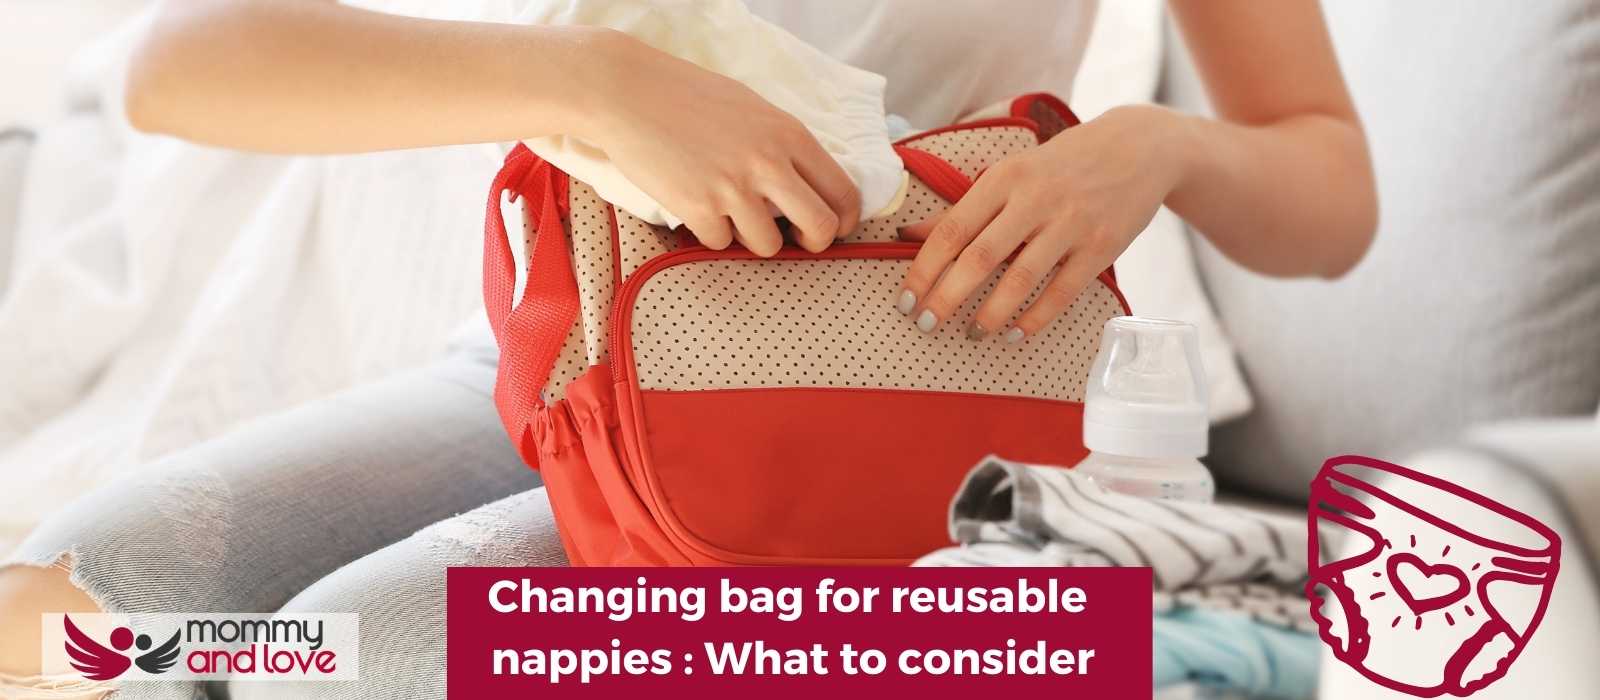 Changing bag for reusable nappies What to consider